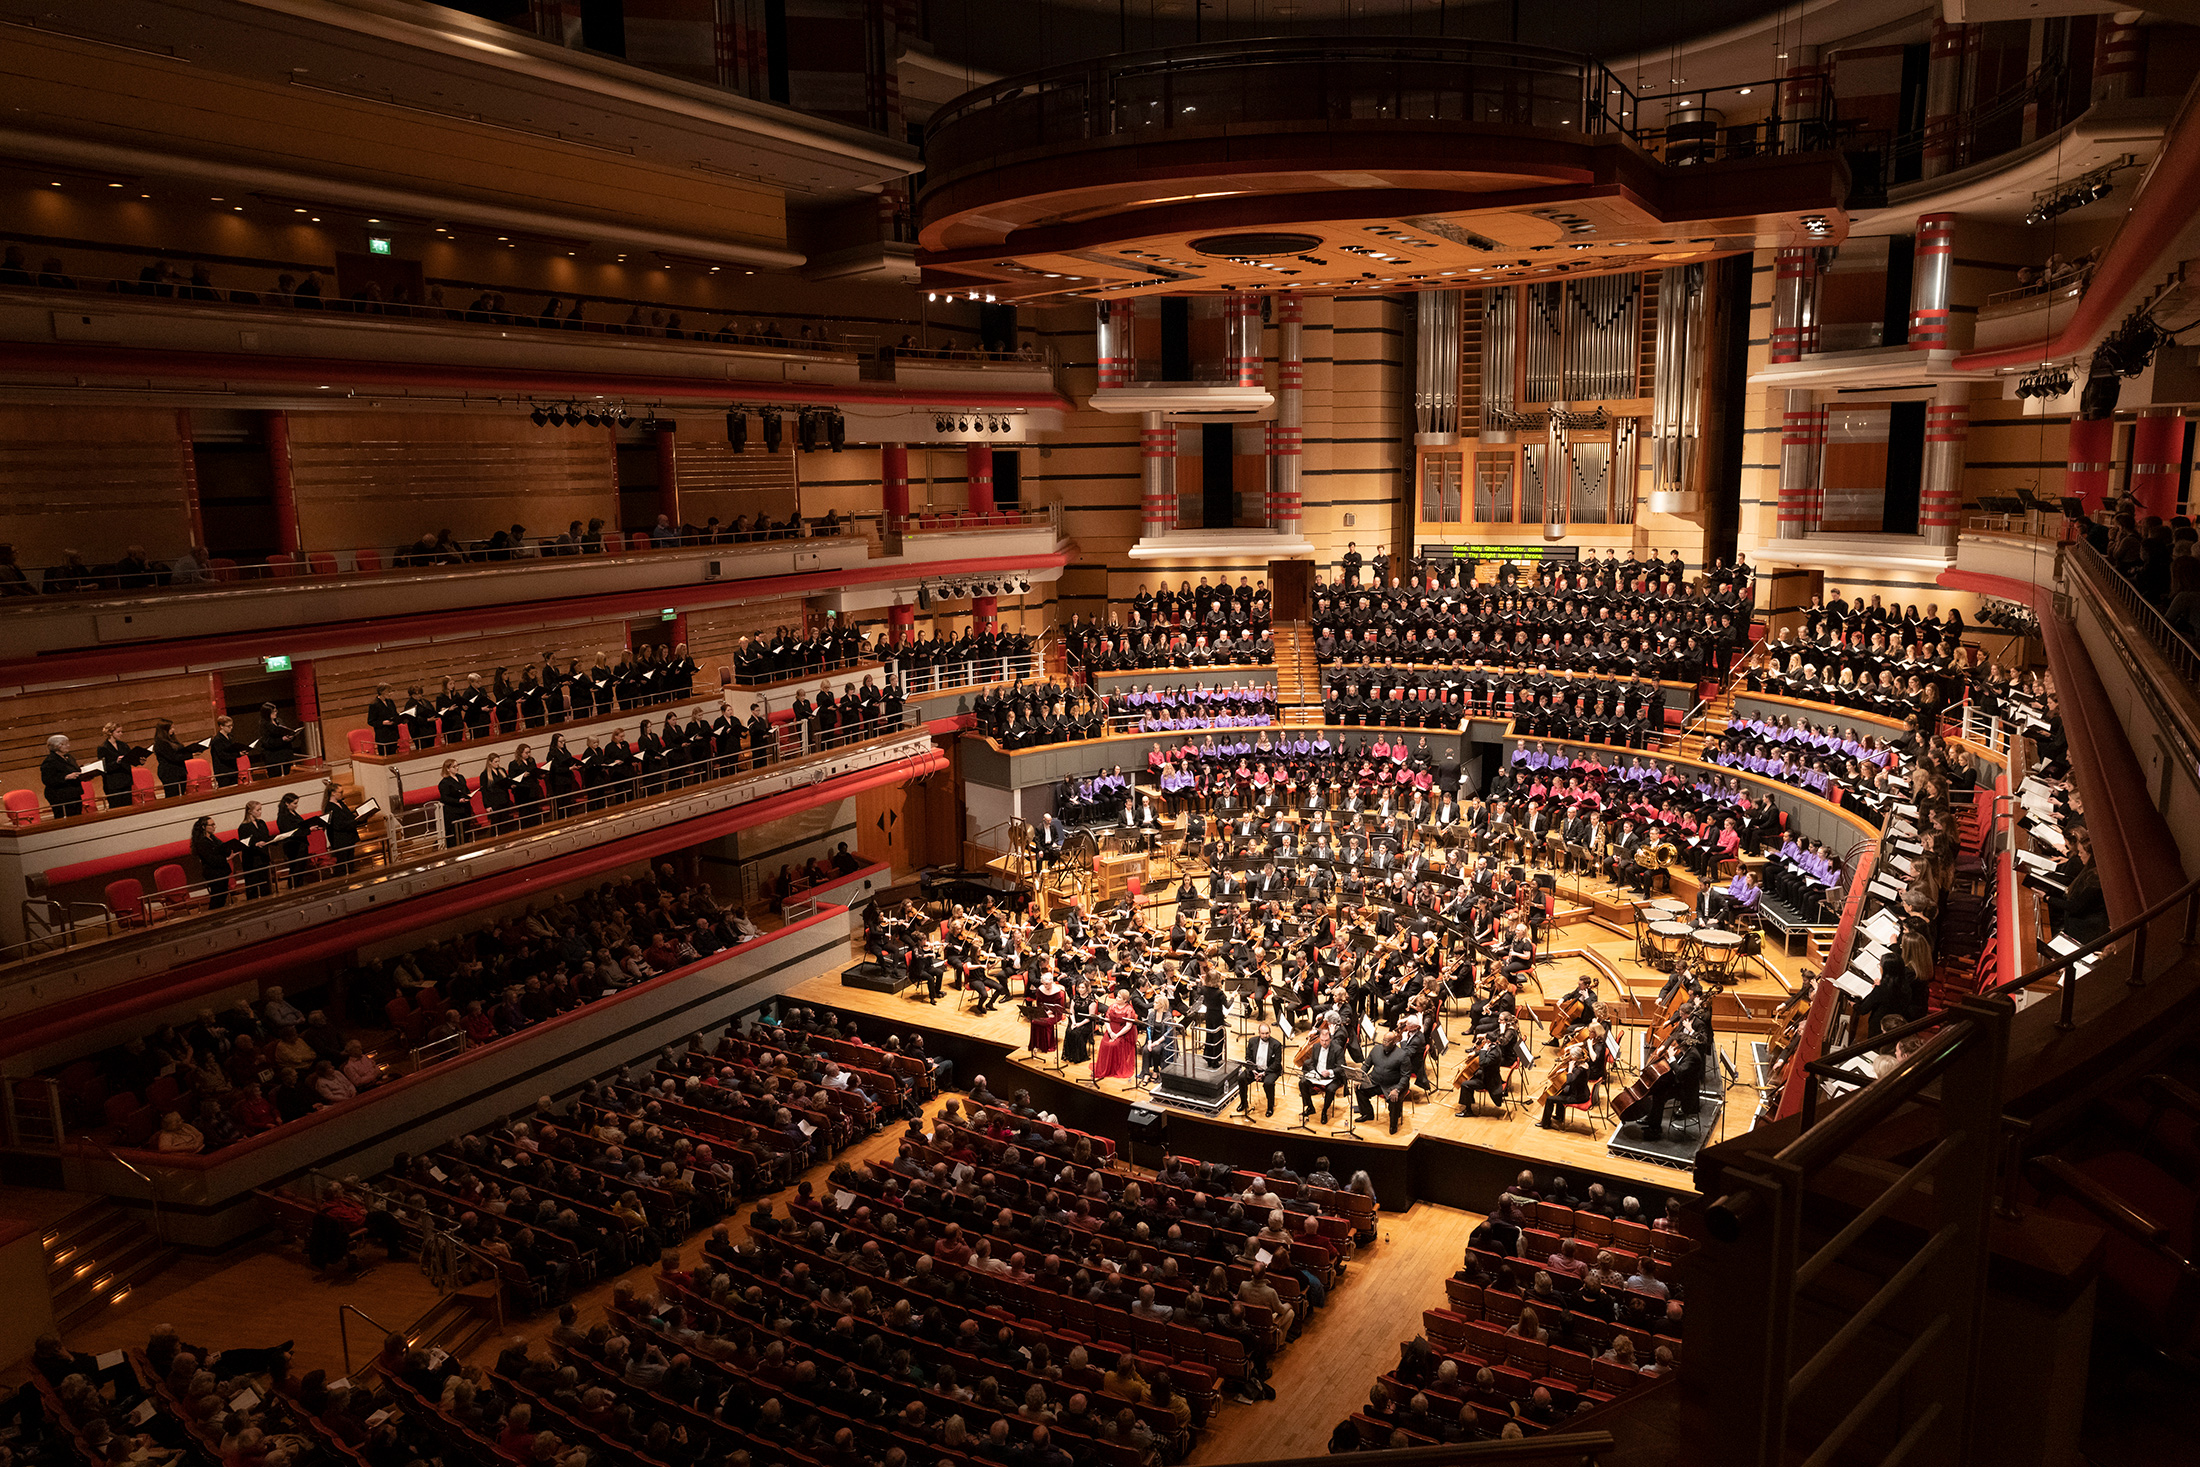 The CBSO’s experiments with the concert experience